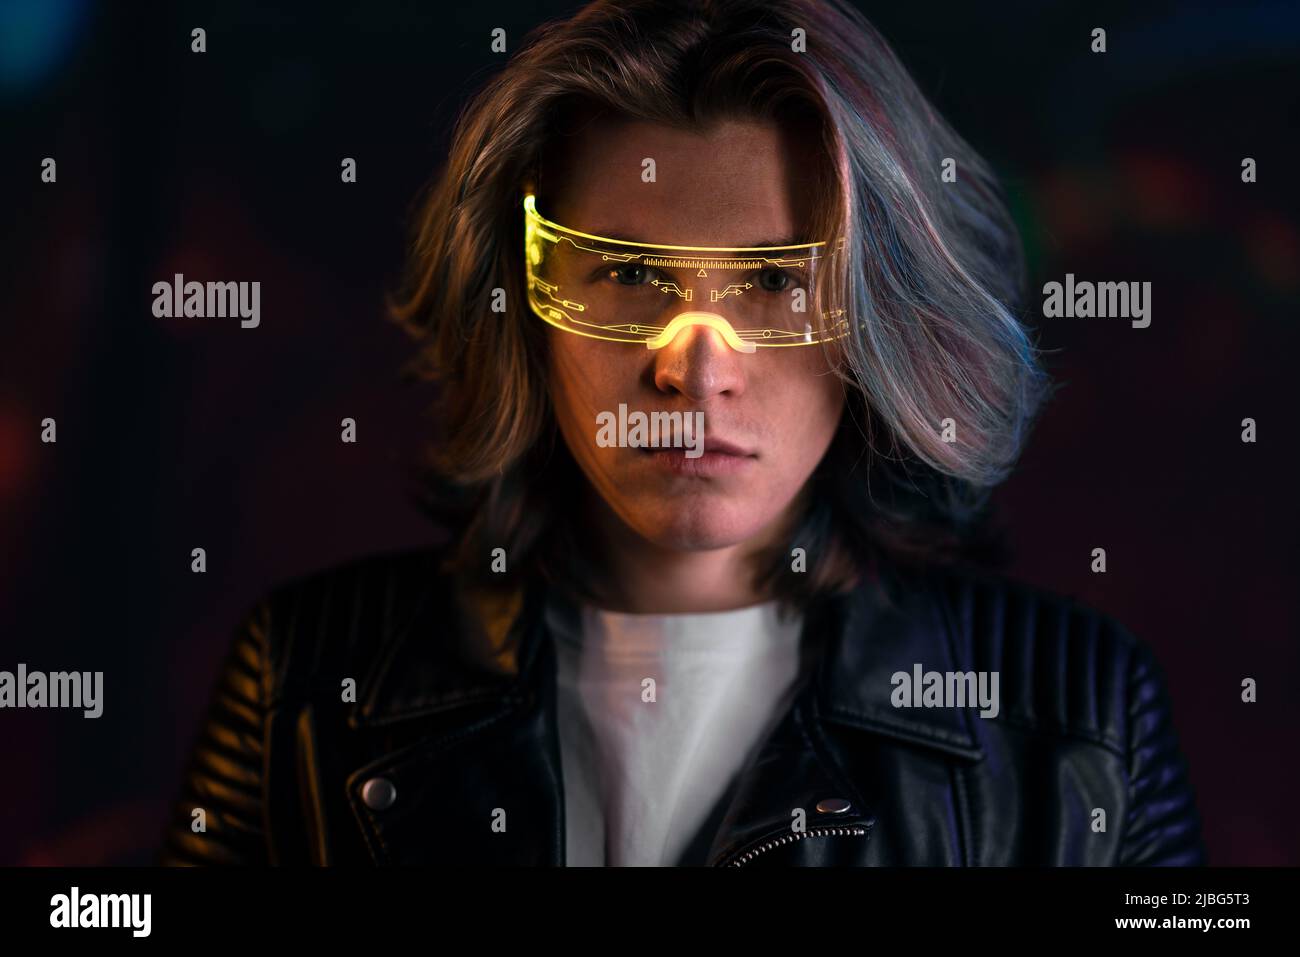 Metaverse digital cyber world technology, portrait of young man with smart glasses, futuristic lifestyle Stock Photo